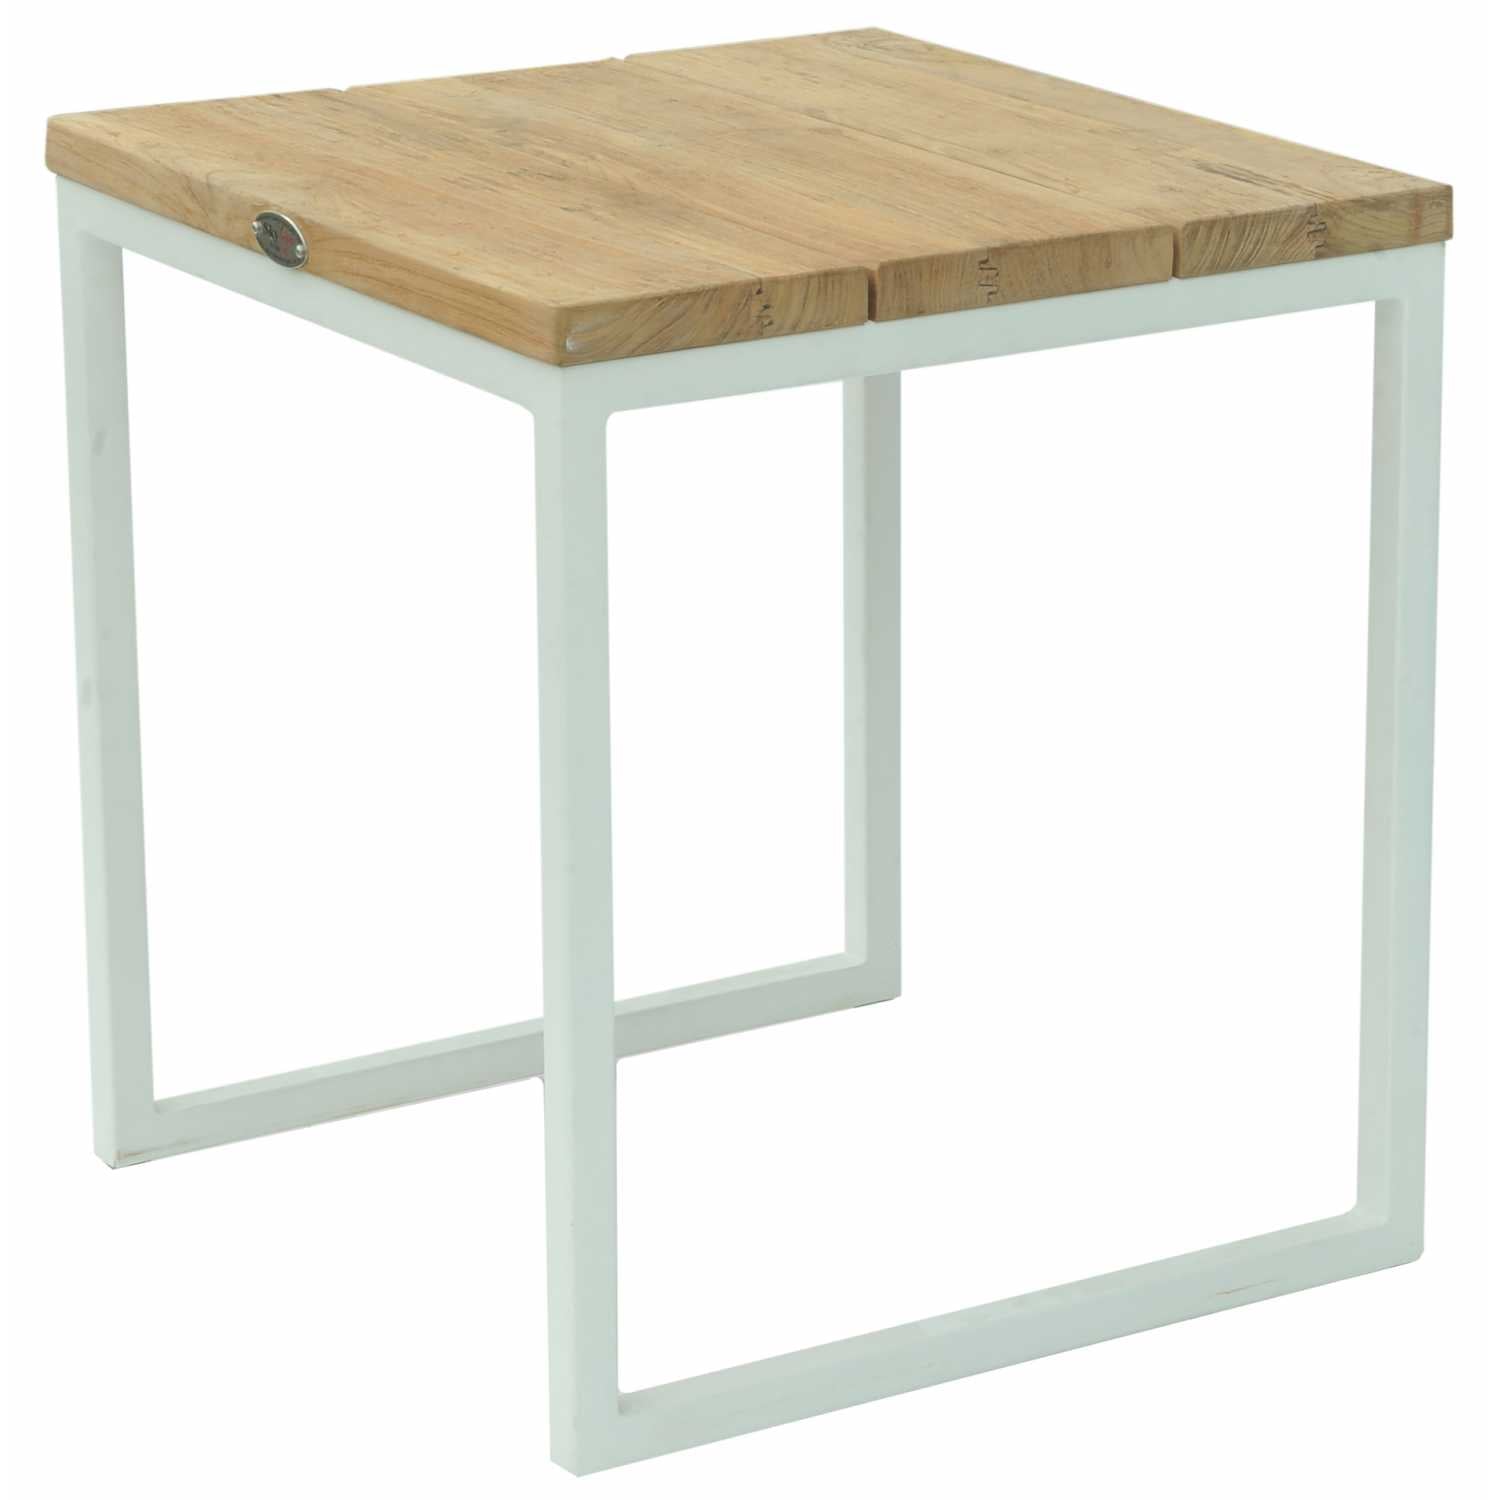 Nautic Side Table - Matte White - PadioLiving - Nautic Side Table - Matte White - Outdoor Side Table - PadioLiving